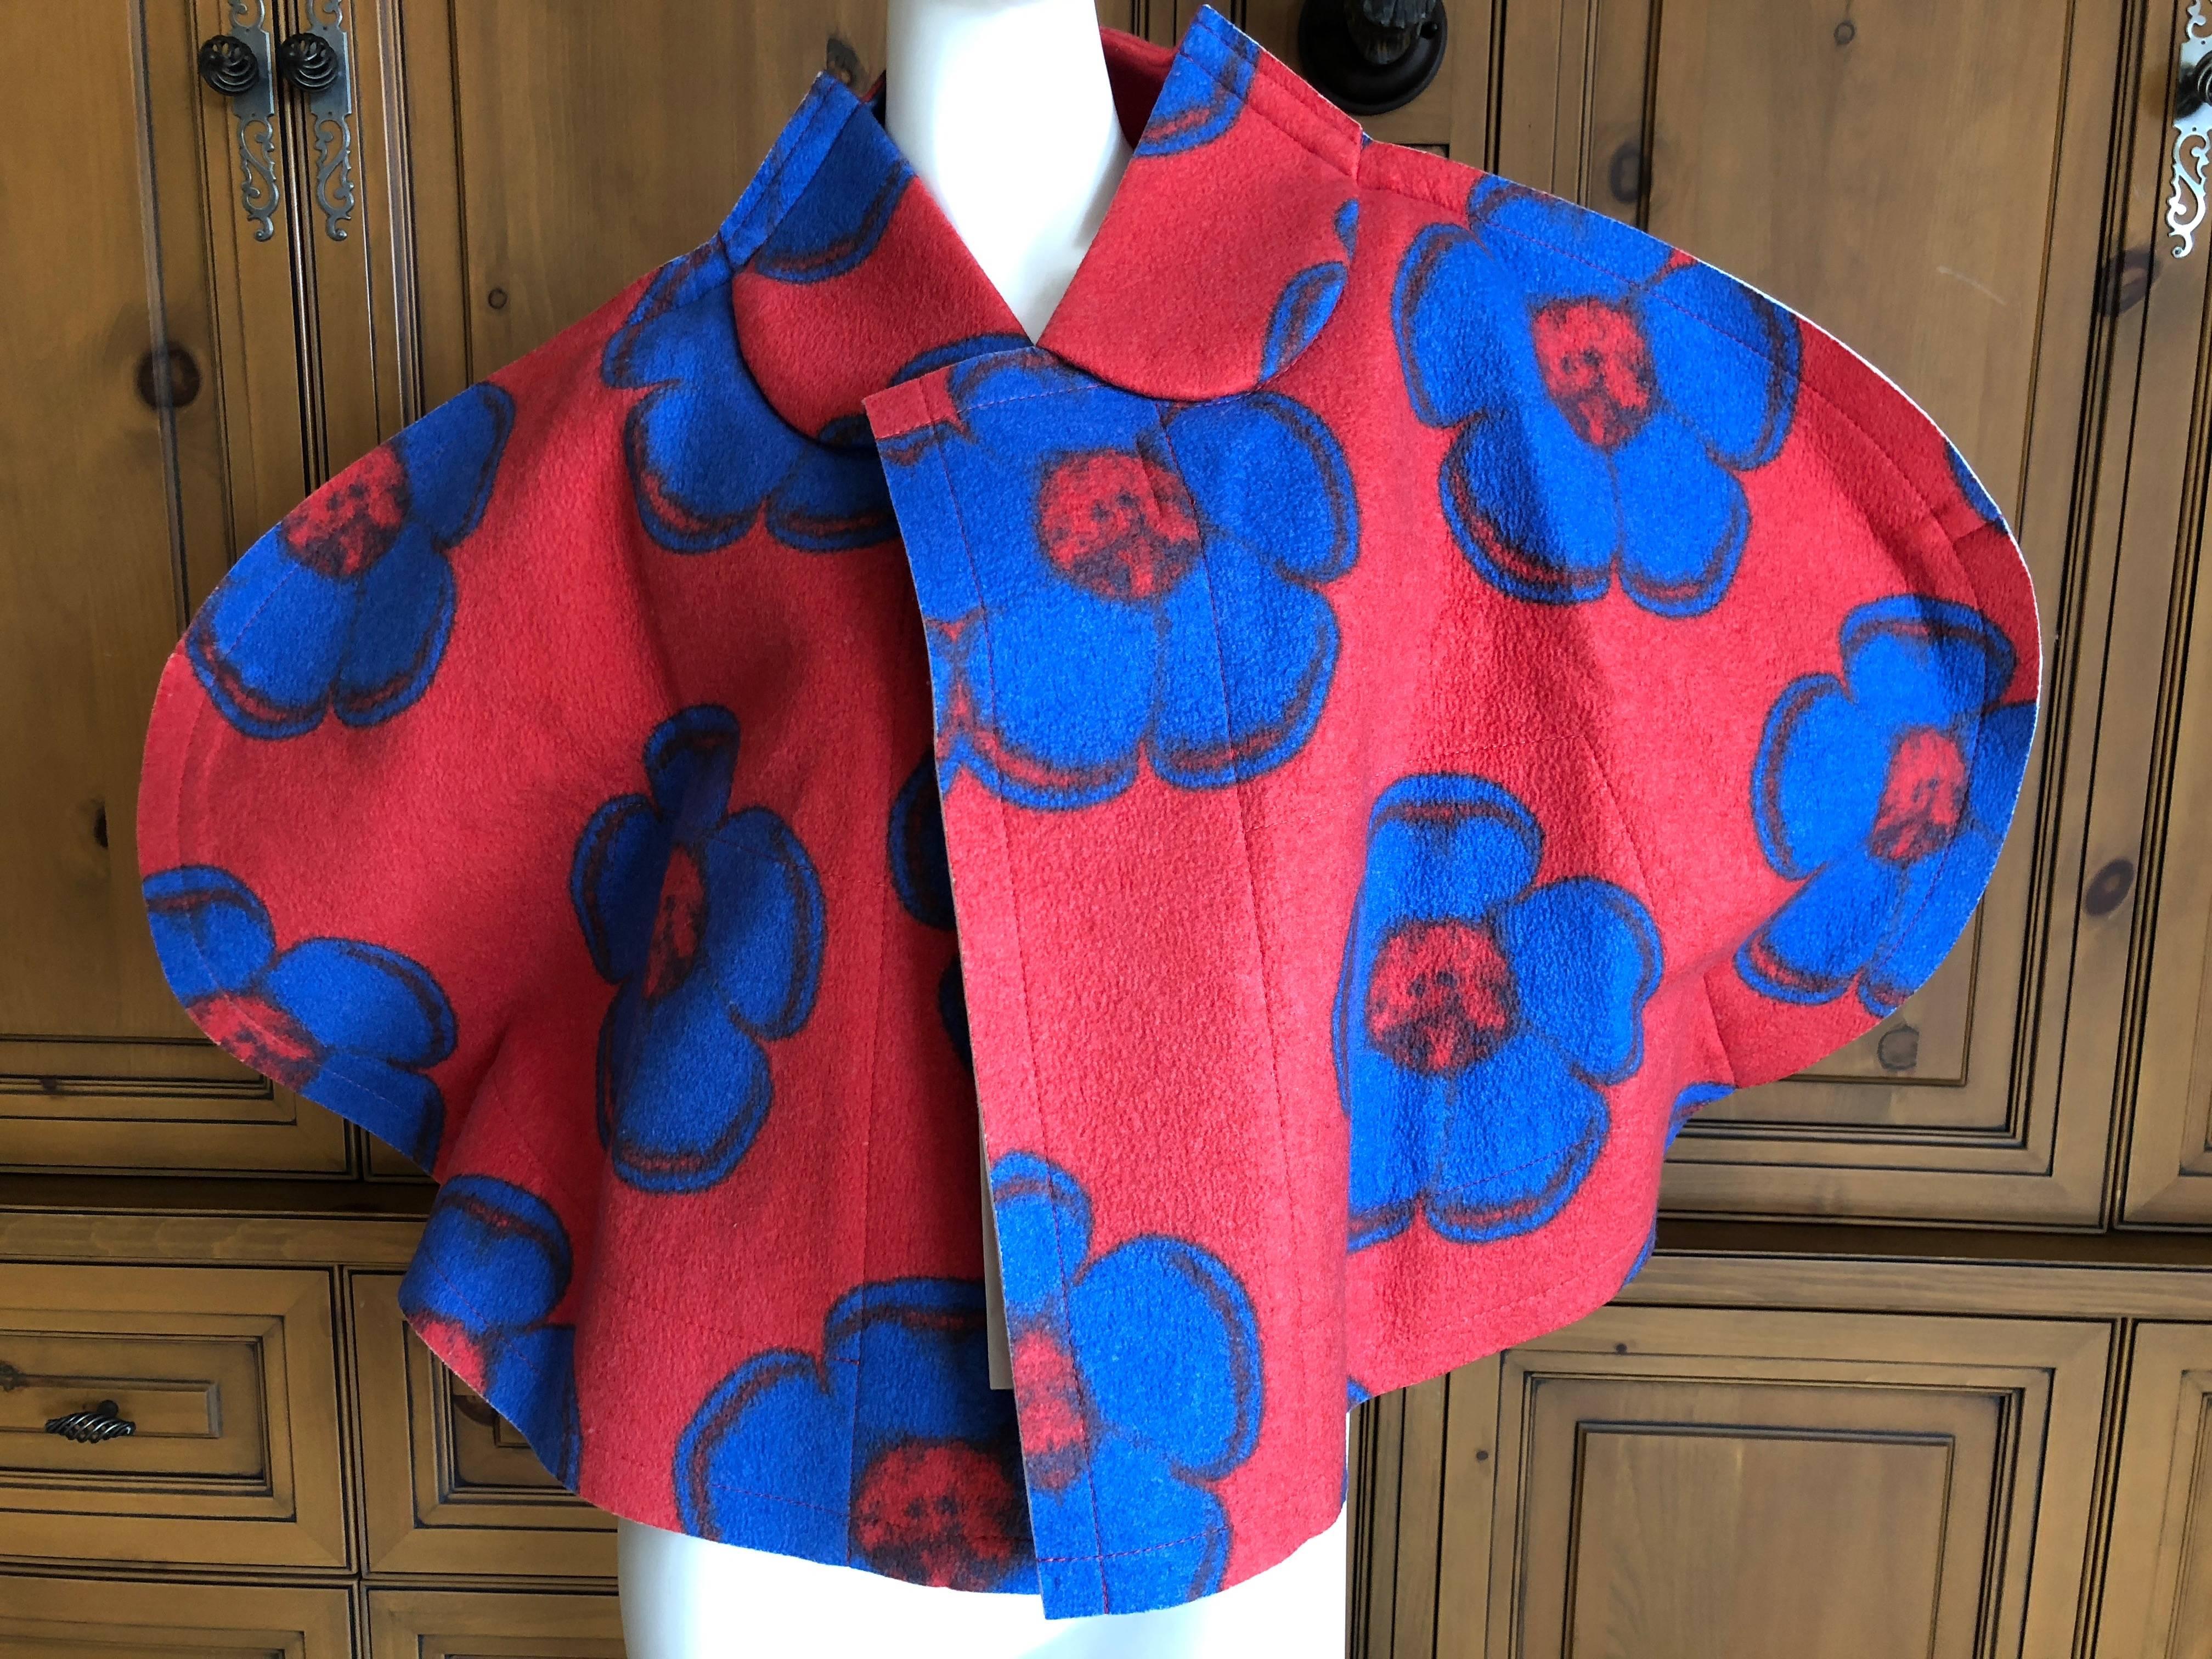 Comme des Garcons Floral Pop Art Felted 2D Cape Jacket  Fall 2012  In New Condition For Sale In Cloverdale, CA